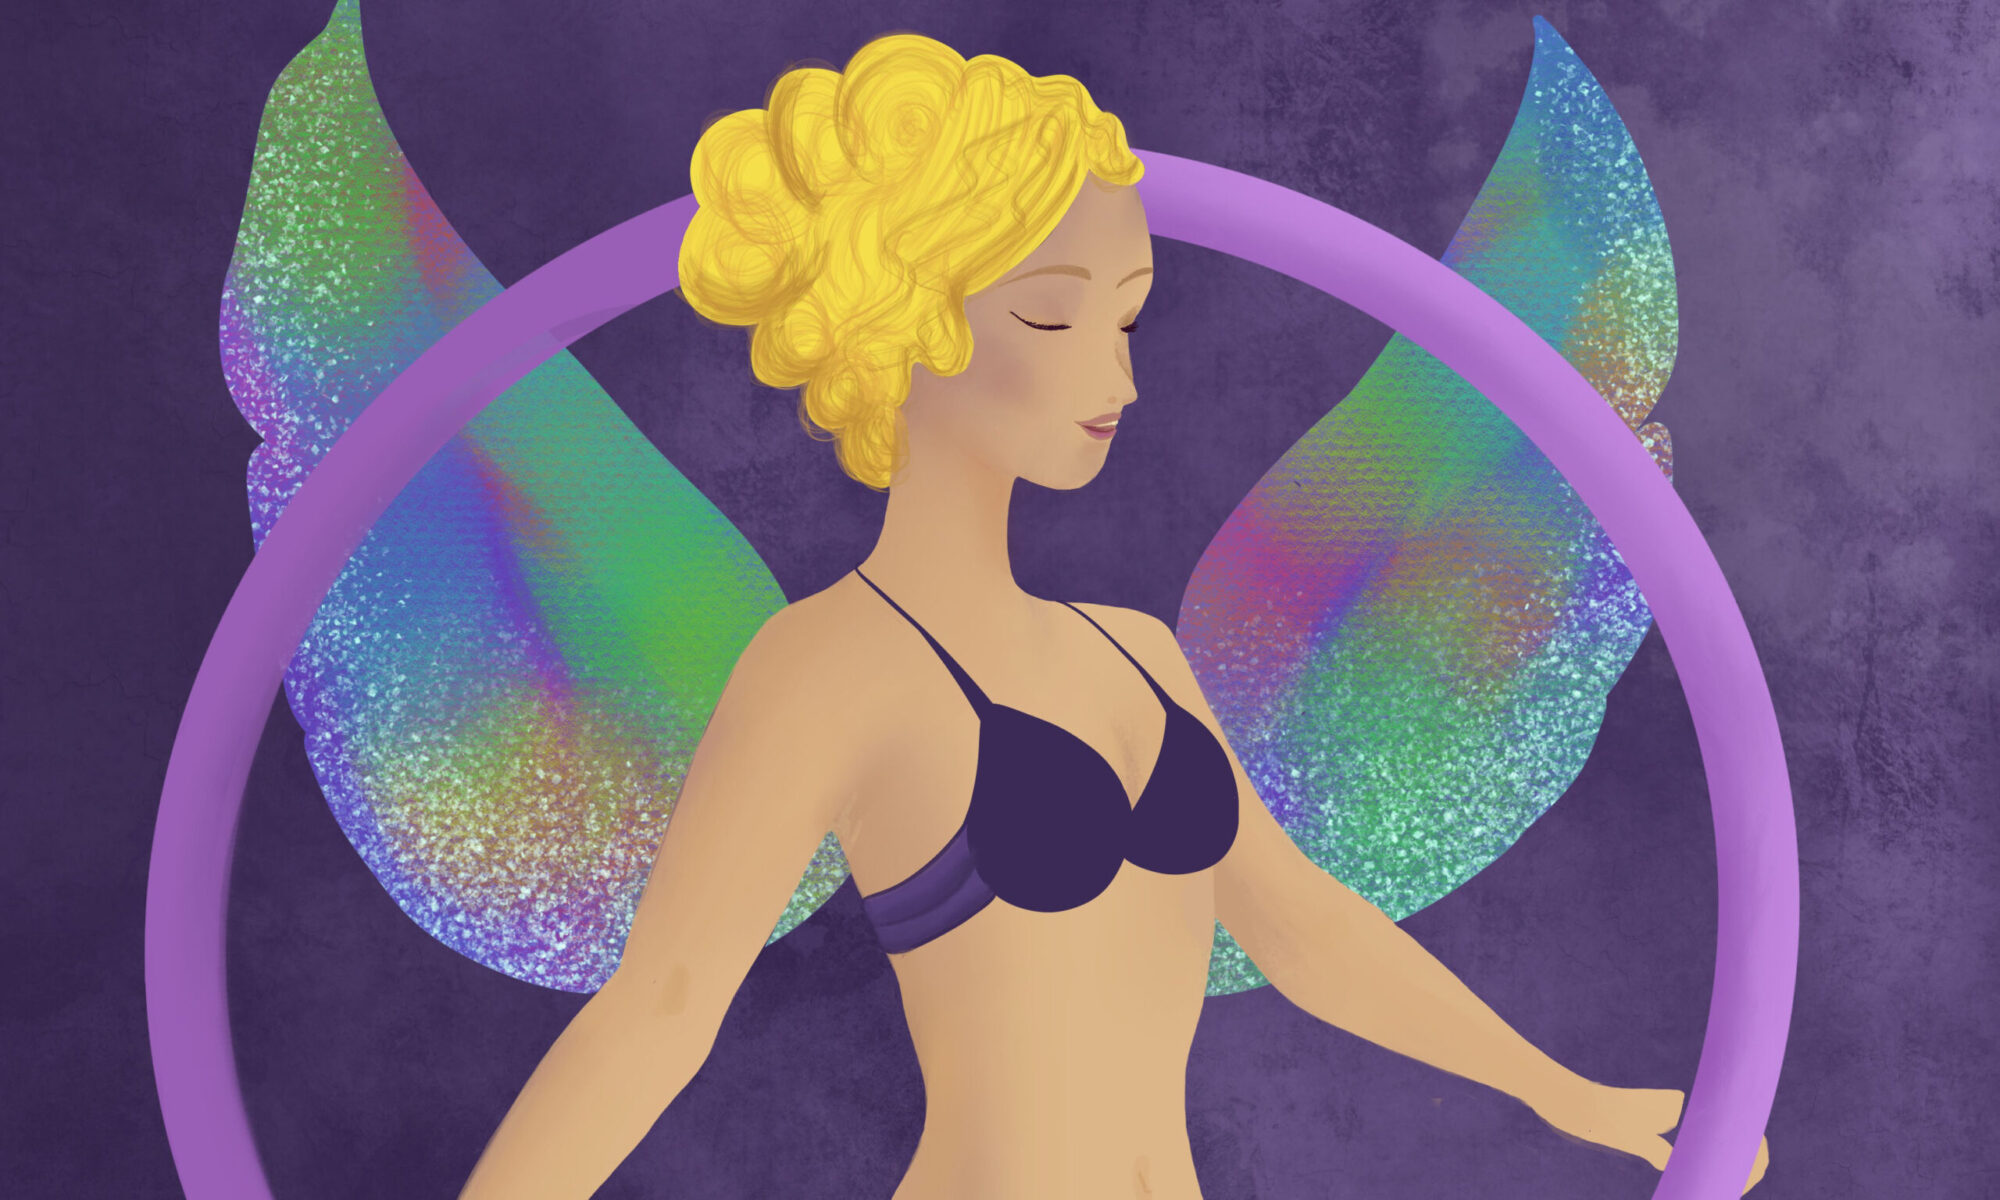 procreate painting of hula hoop dancer dressed as fairy with iridescent wings and lavender hula hoop